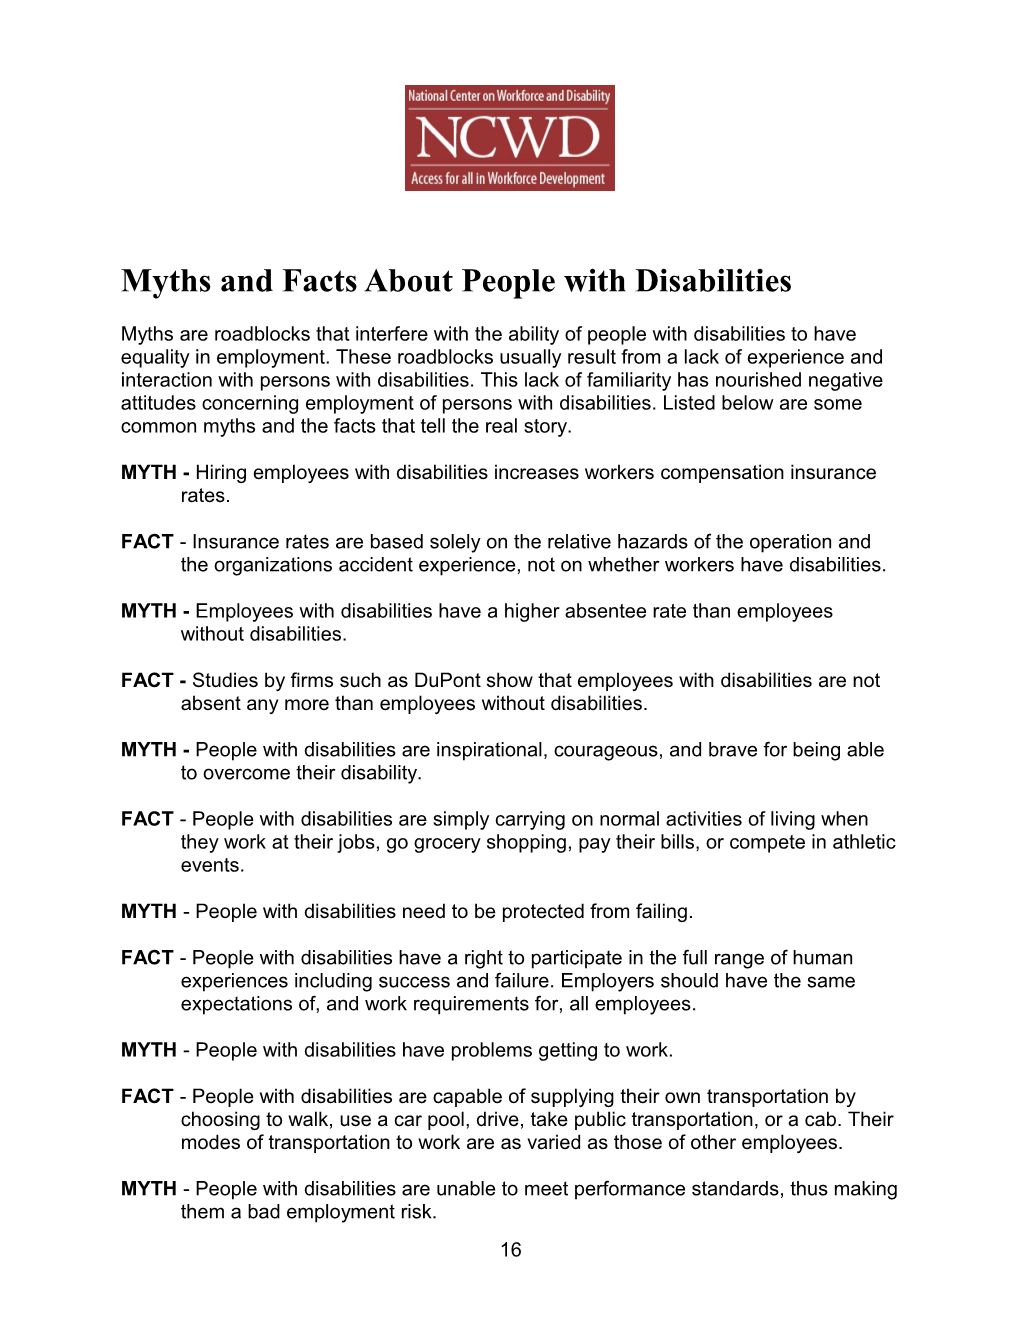 Myths and Facts About People with Disabilities